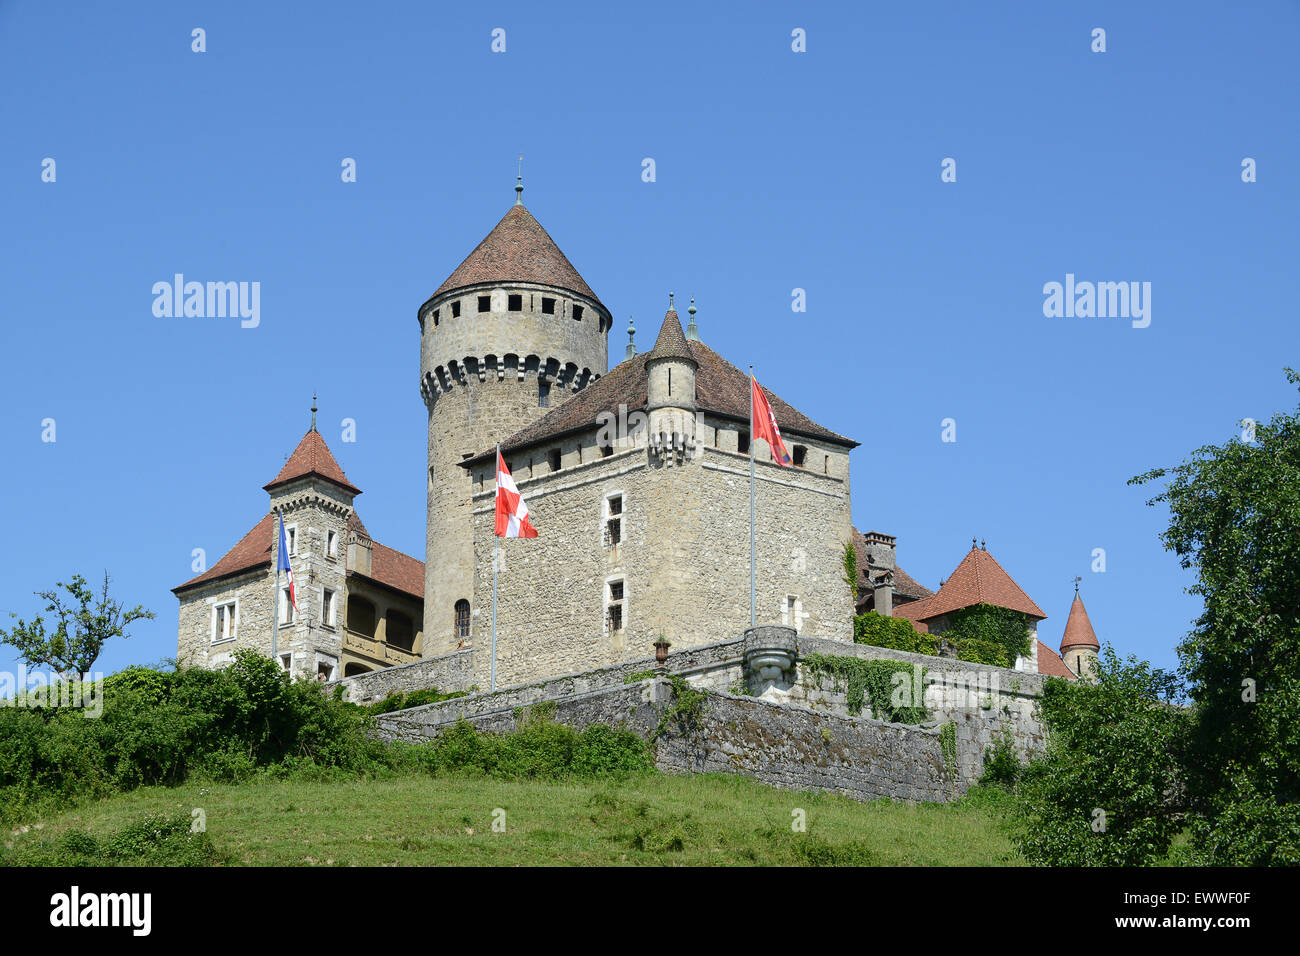 Chateau de Montrottier in Lovagny France chateaux Stock Photo